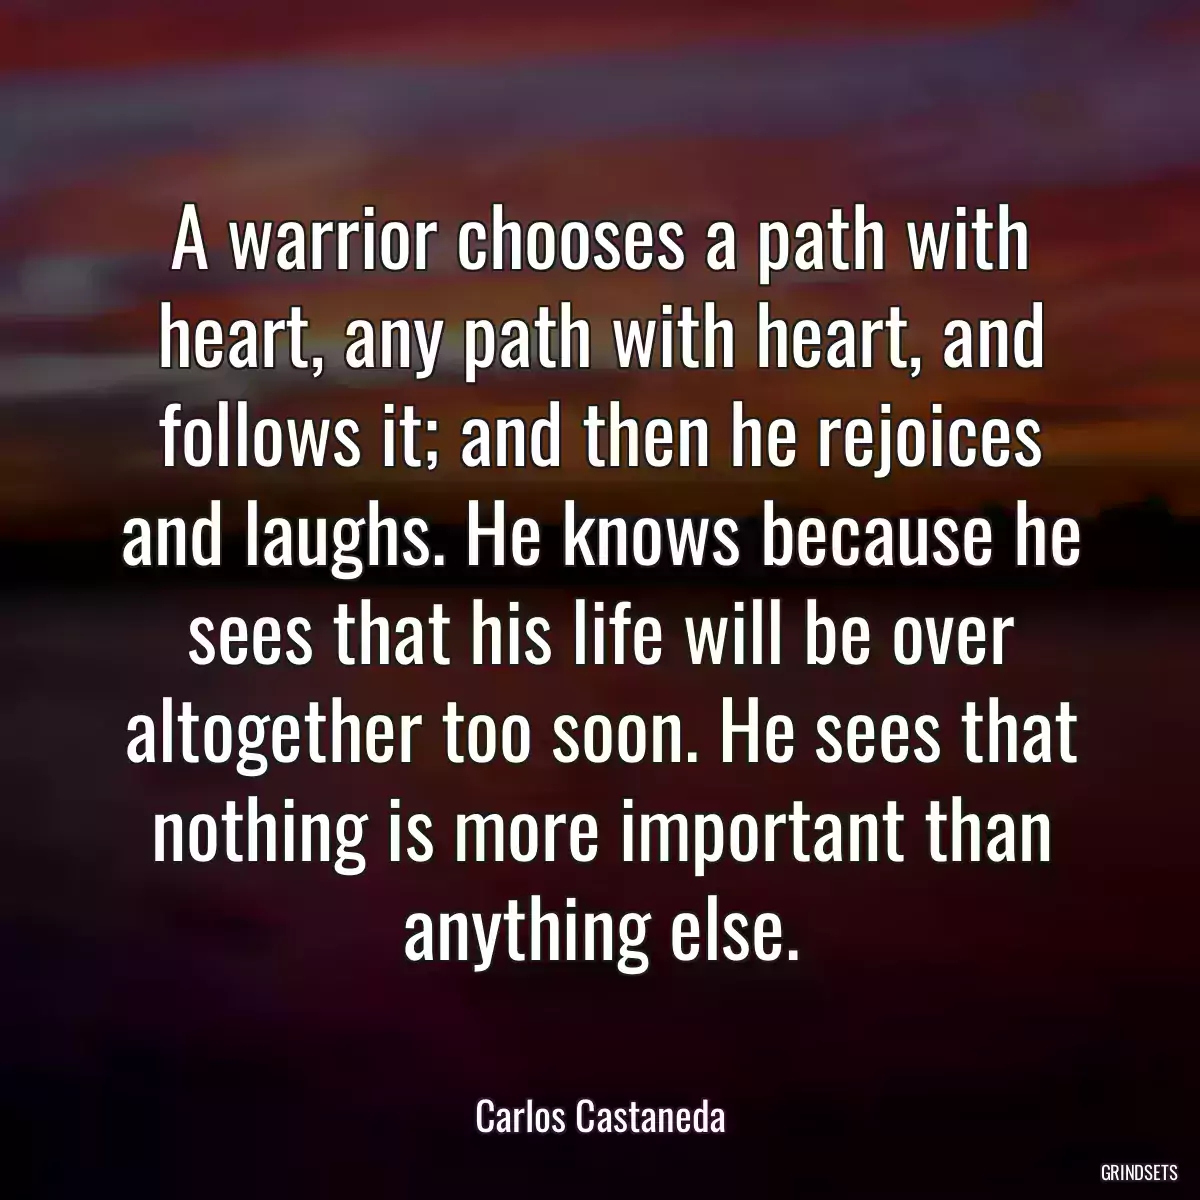 A warrior chooses a path with heart, any path with heart, and follows it; and then he rejoices and laughs. He knows because he sees that his life will be over altogether too soon. He sees that nothing is more important than anything else.